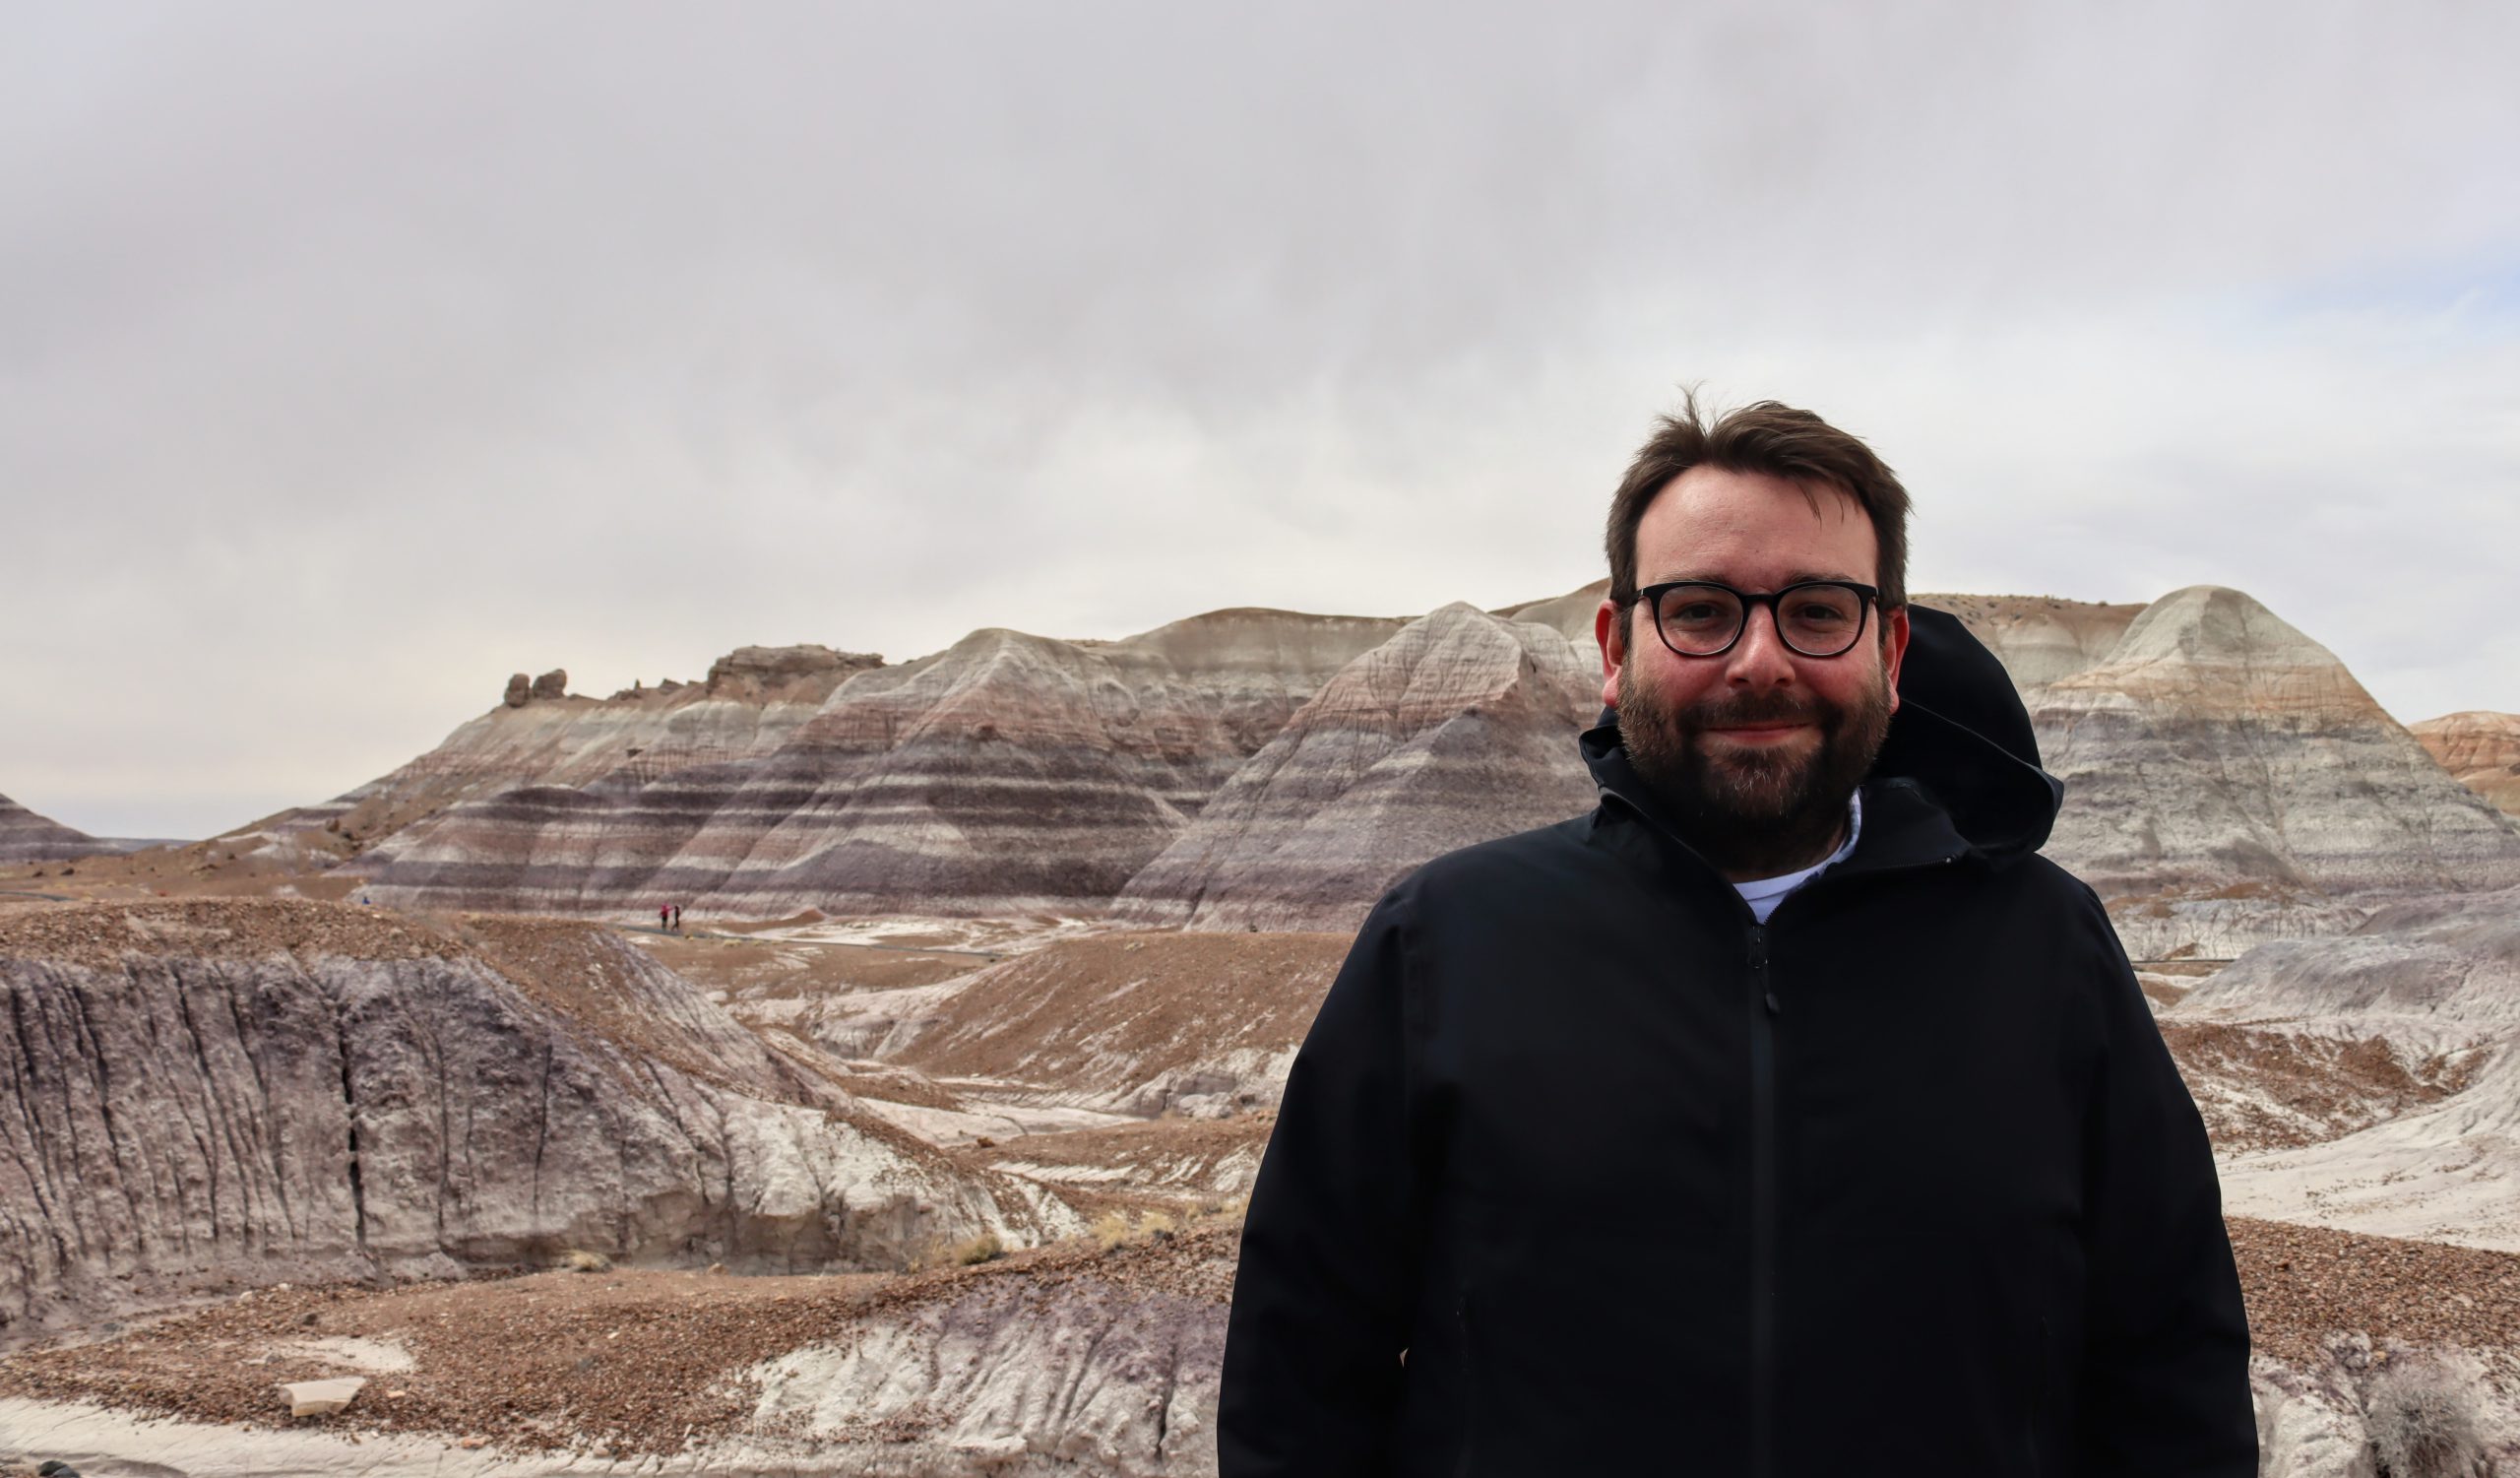 Photograph of Kevin Seeber at Petrified Forest National Park.